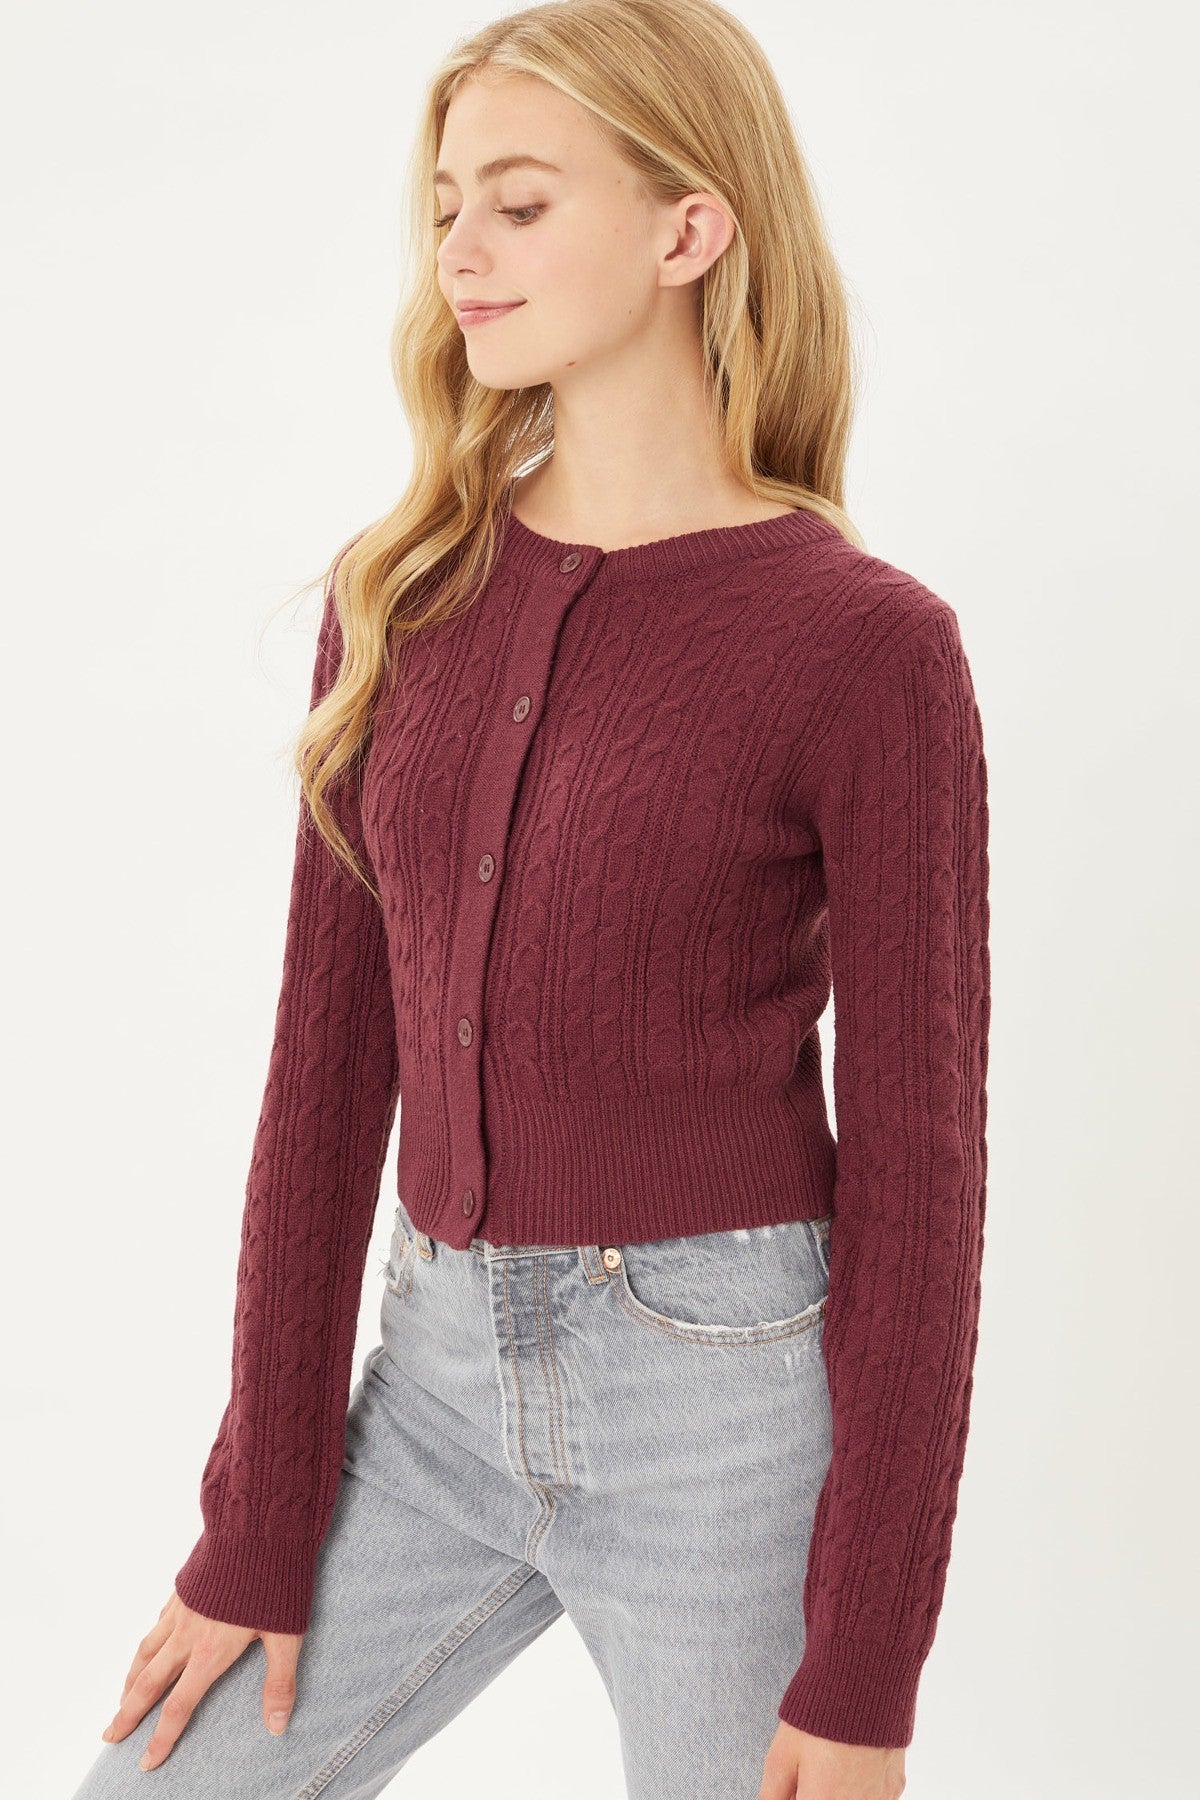 Women's Buttoned Cable Knit Cardigan Long Sleeve Sweater